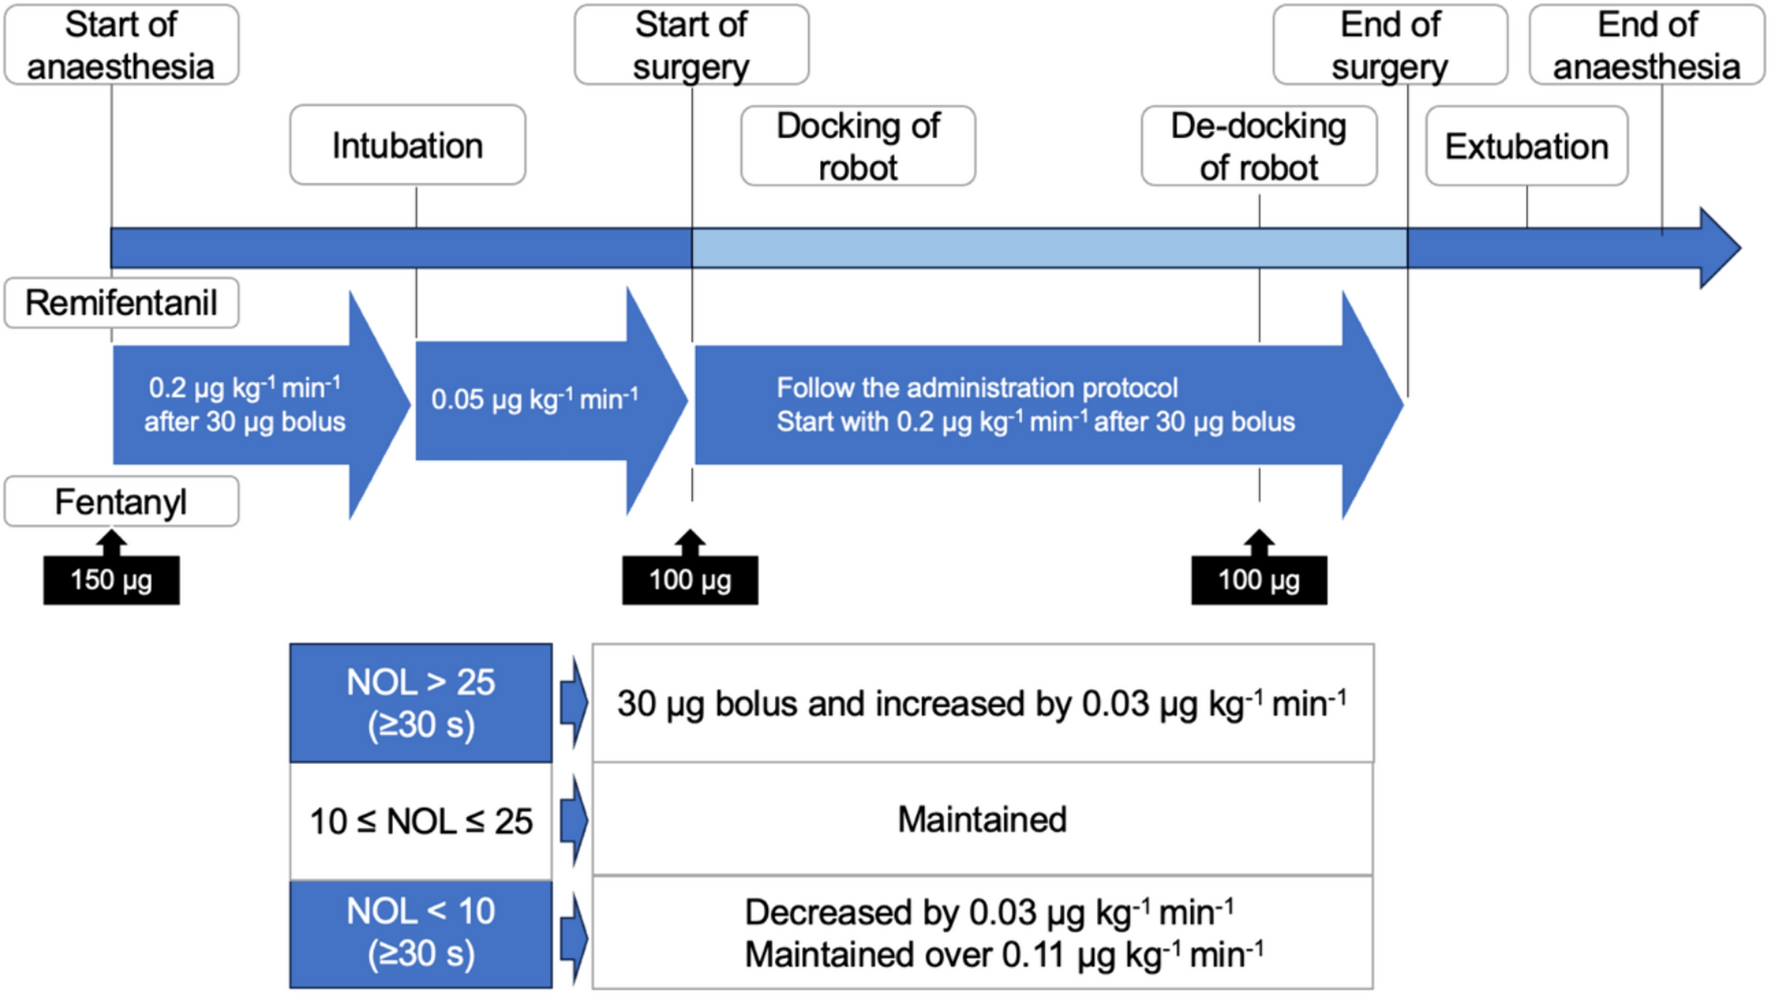 Effect of nociception level-directed analgesic management on opioid usage in robot-assisted laparoscopic radical prostatectomy: a single-center, single-blinded, randomized controlled trial